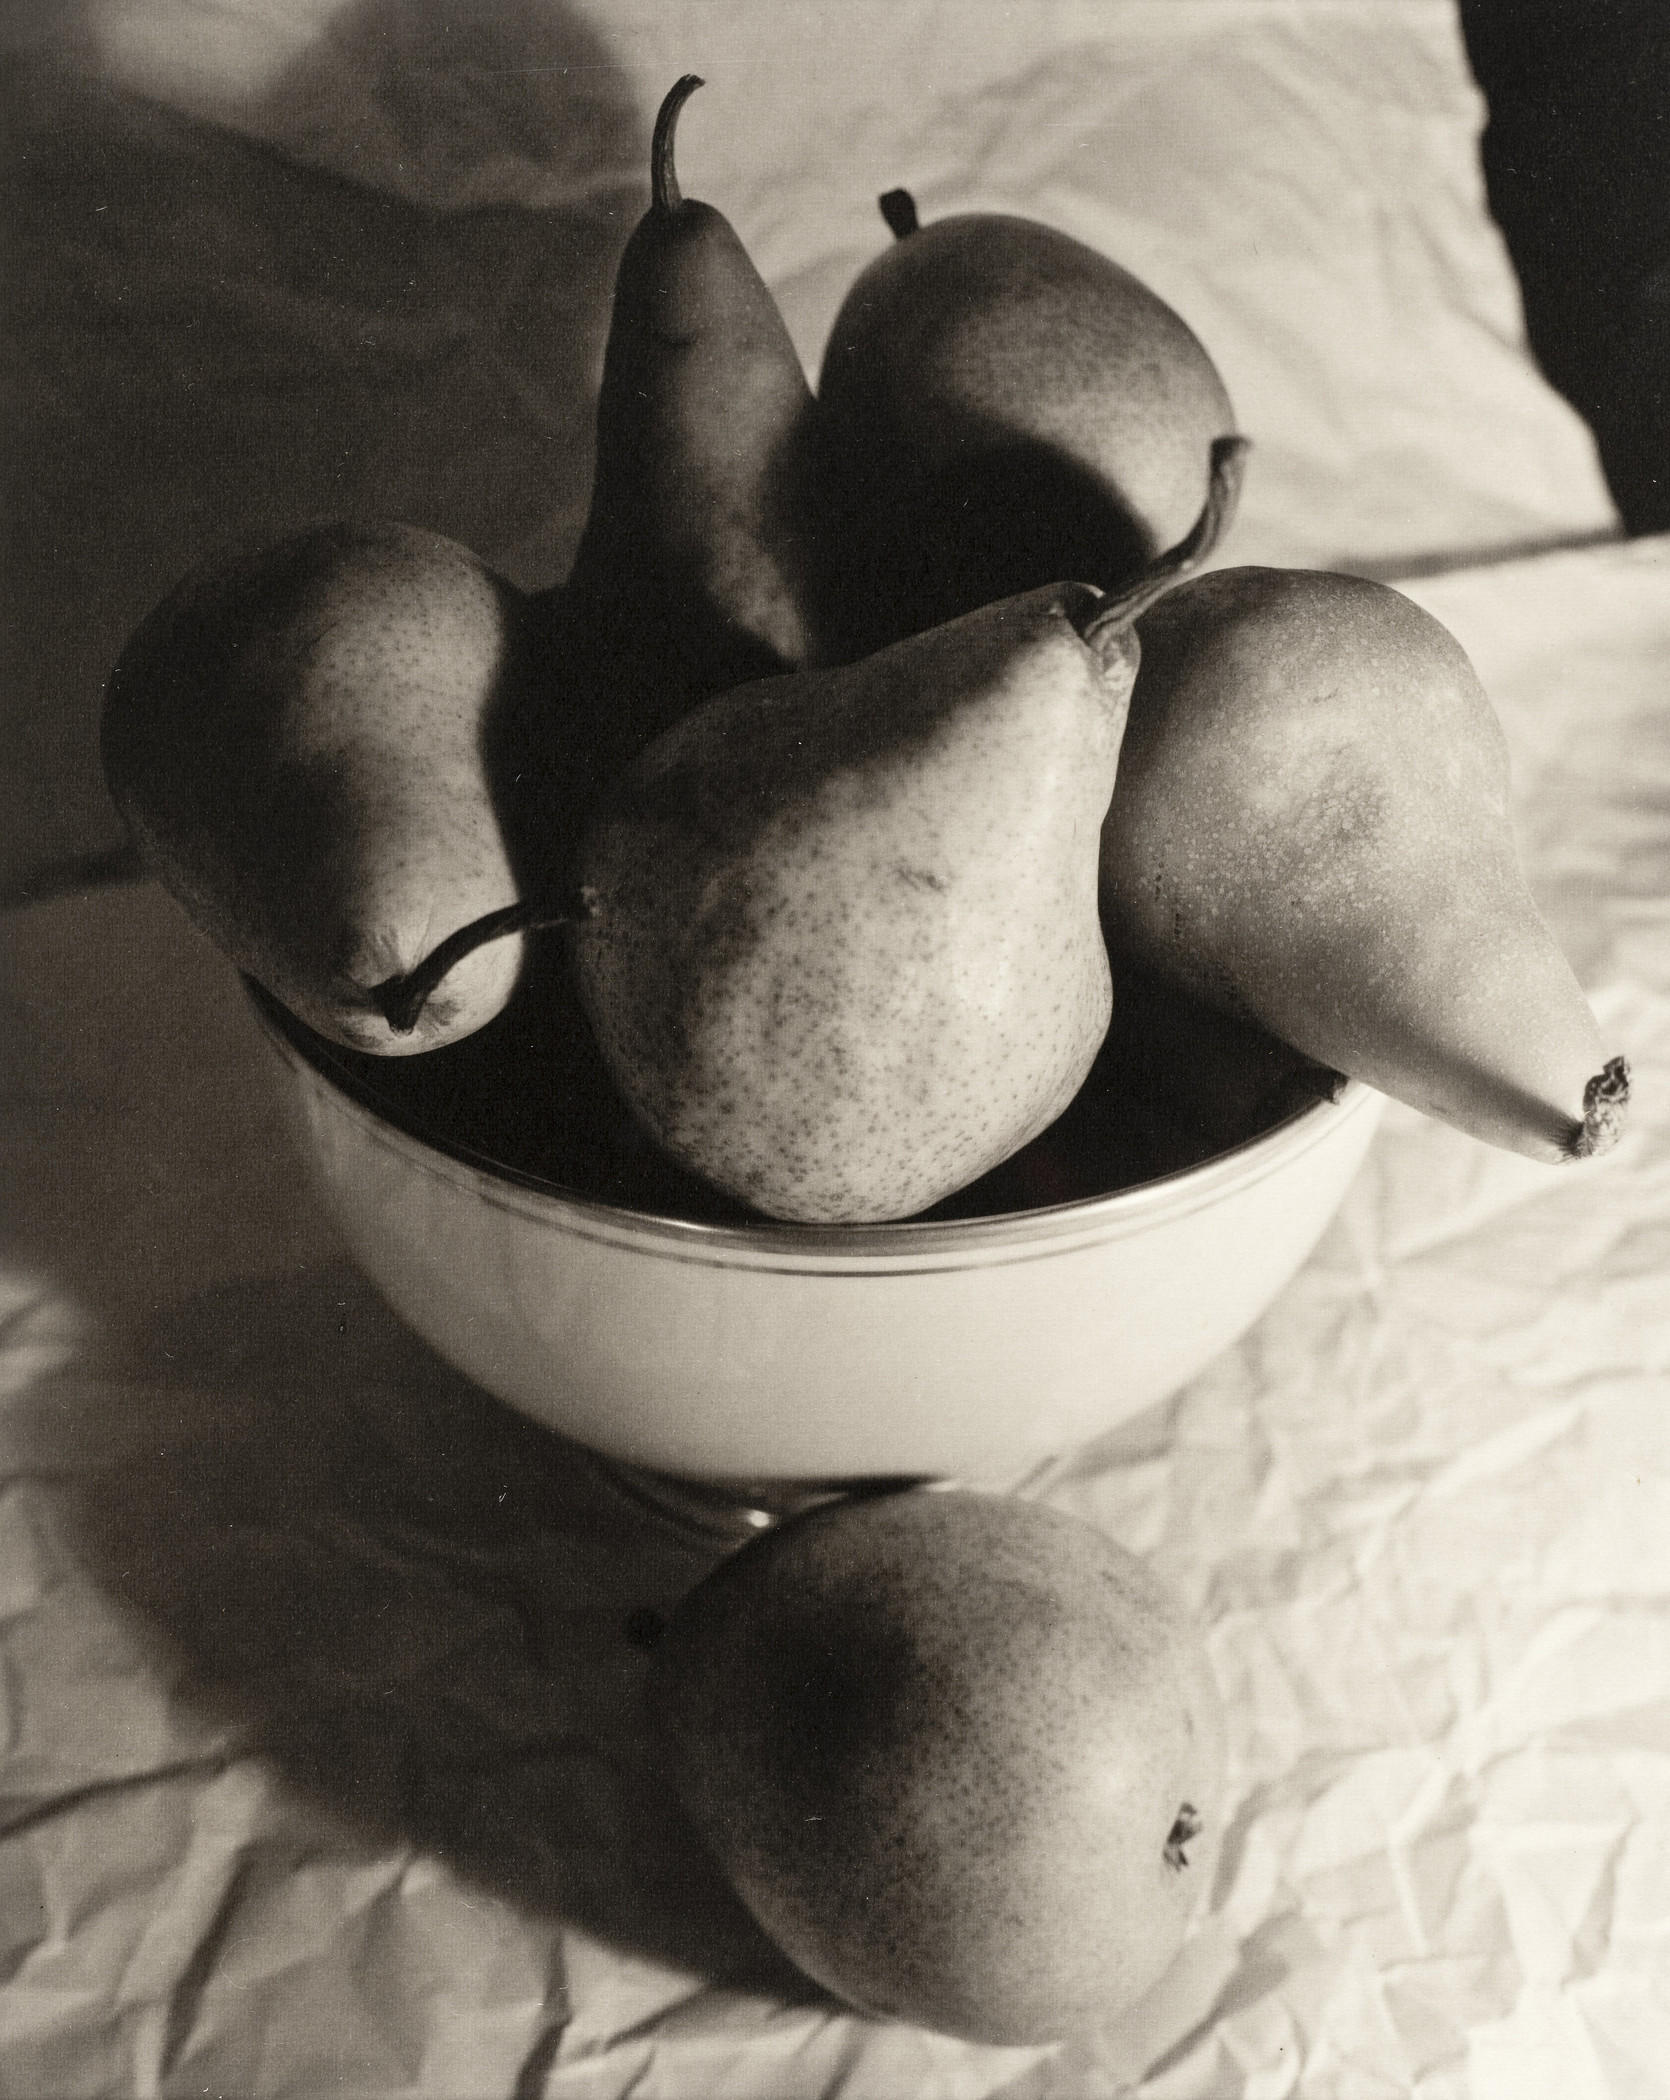 Black and white photograph of bowl of pears